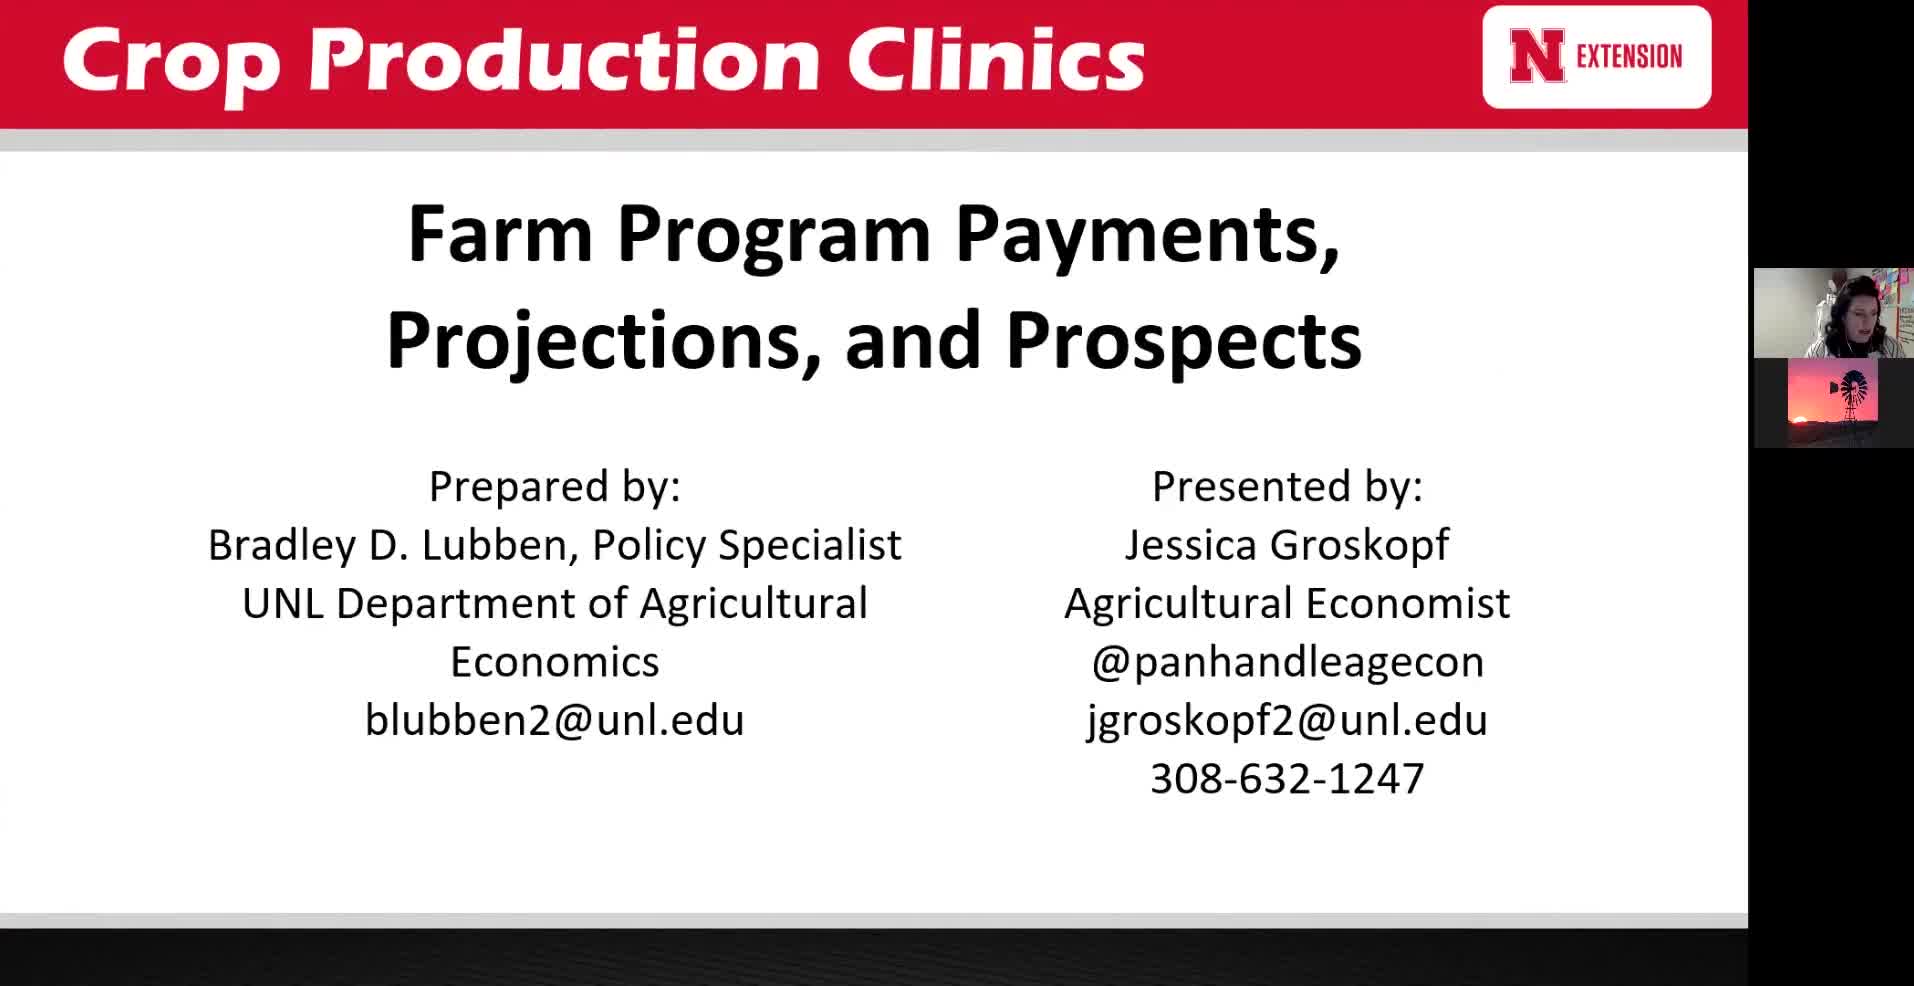 Farm Program Payments, Projections, and Prospects